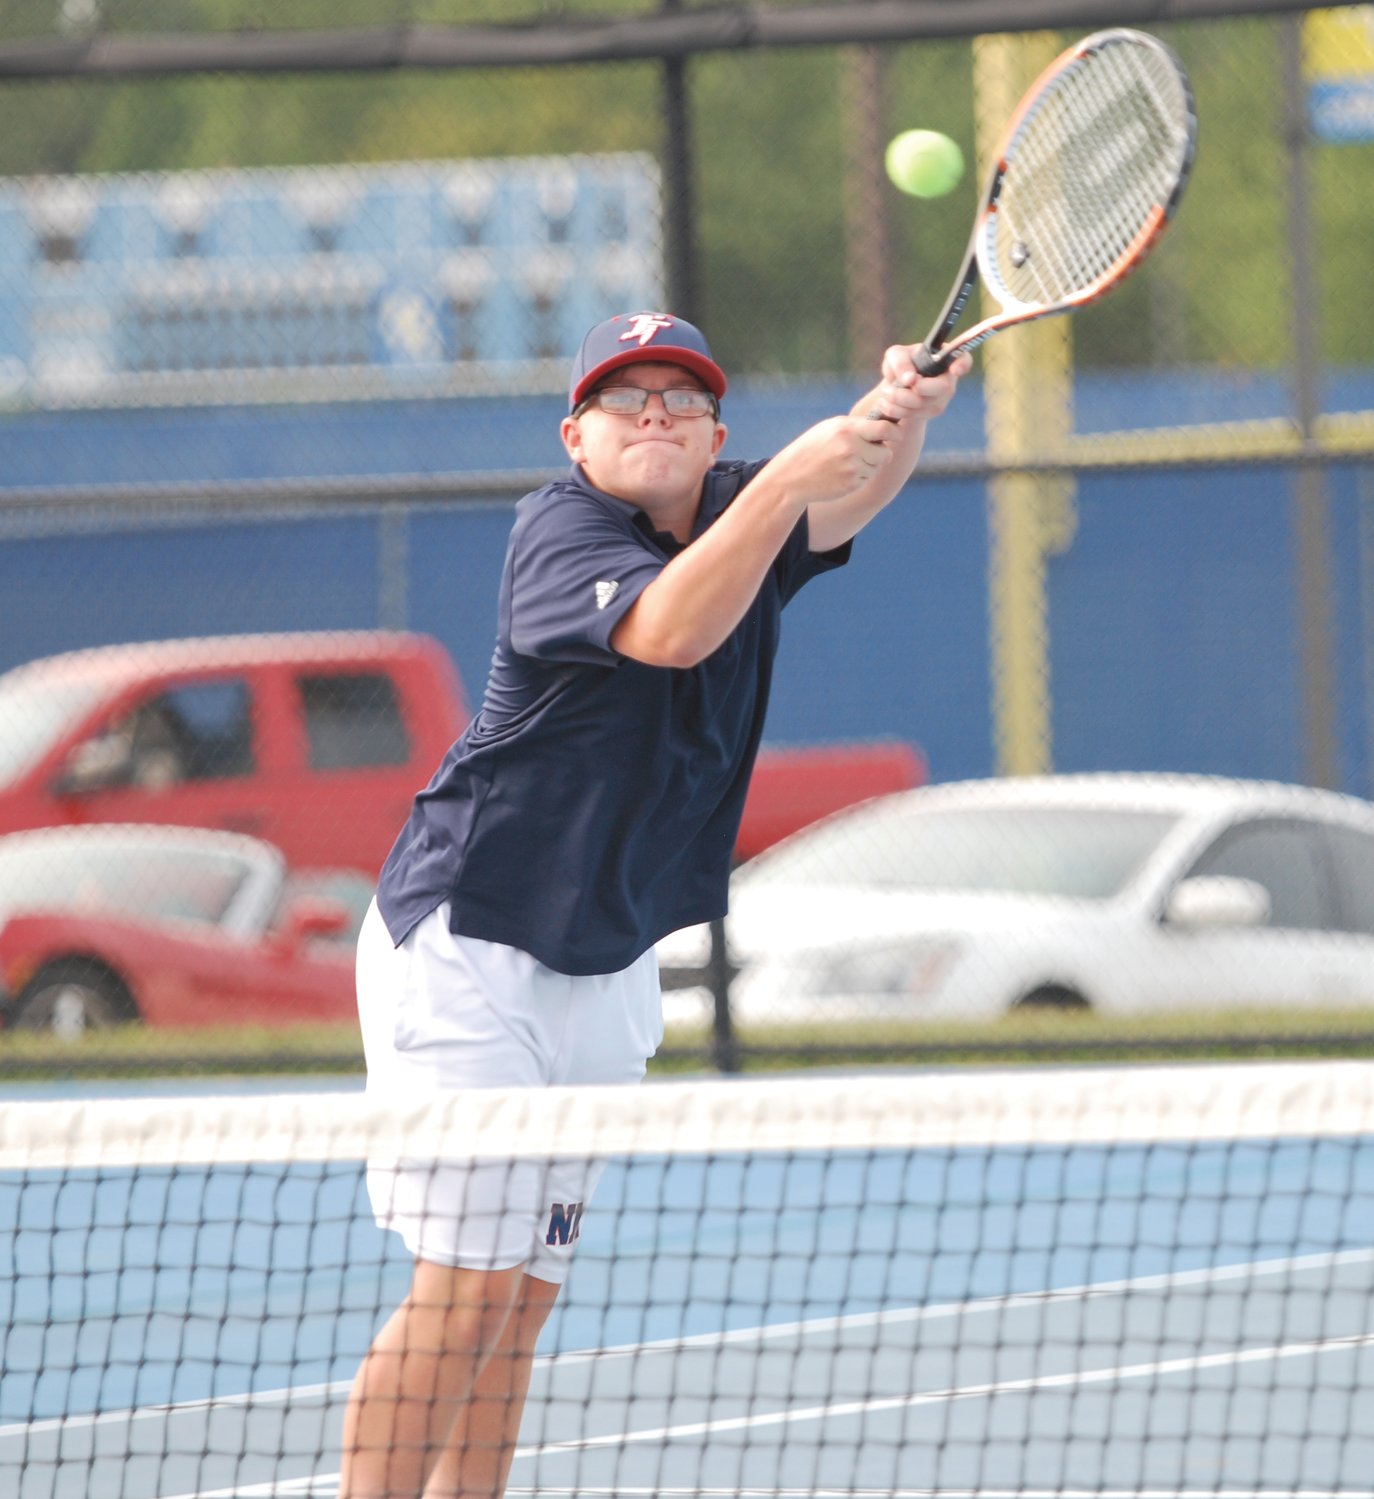 North Montgomery's Hayden Turner returns a shot on Monday during his No. 2 doubles match against Crawfordsville.